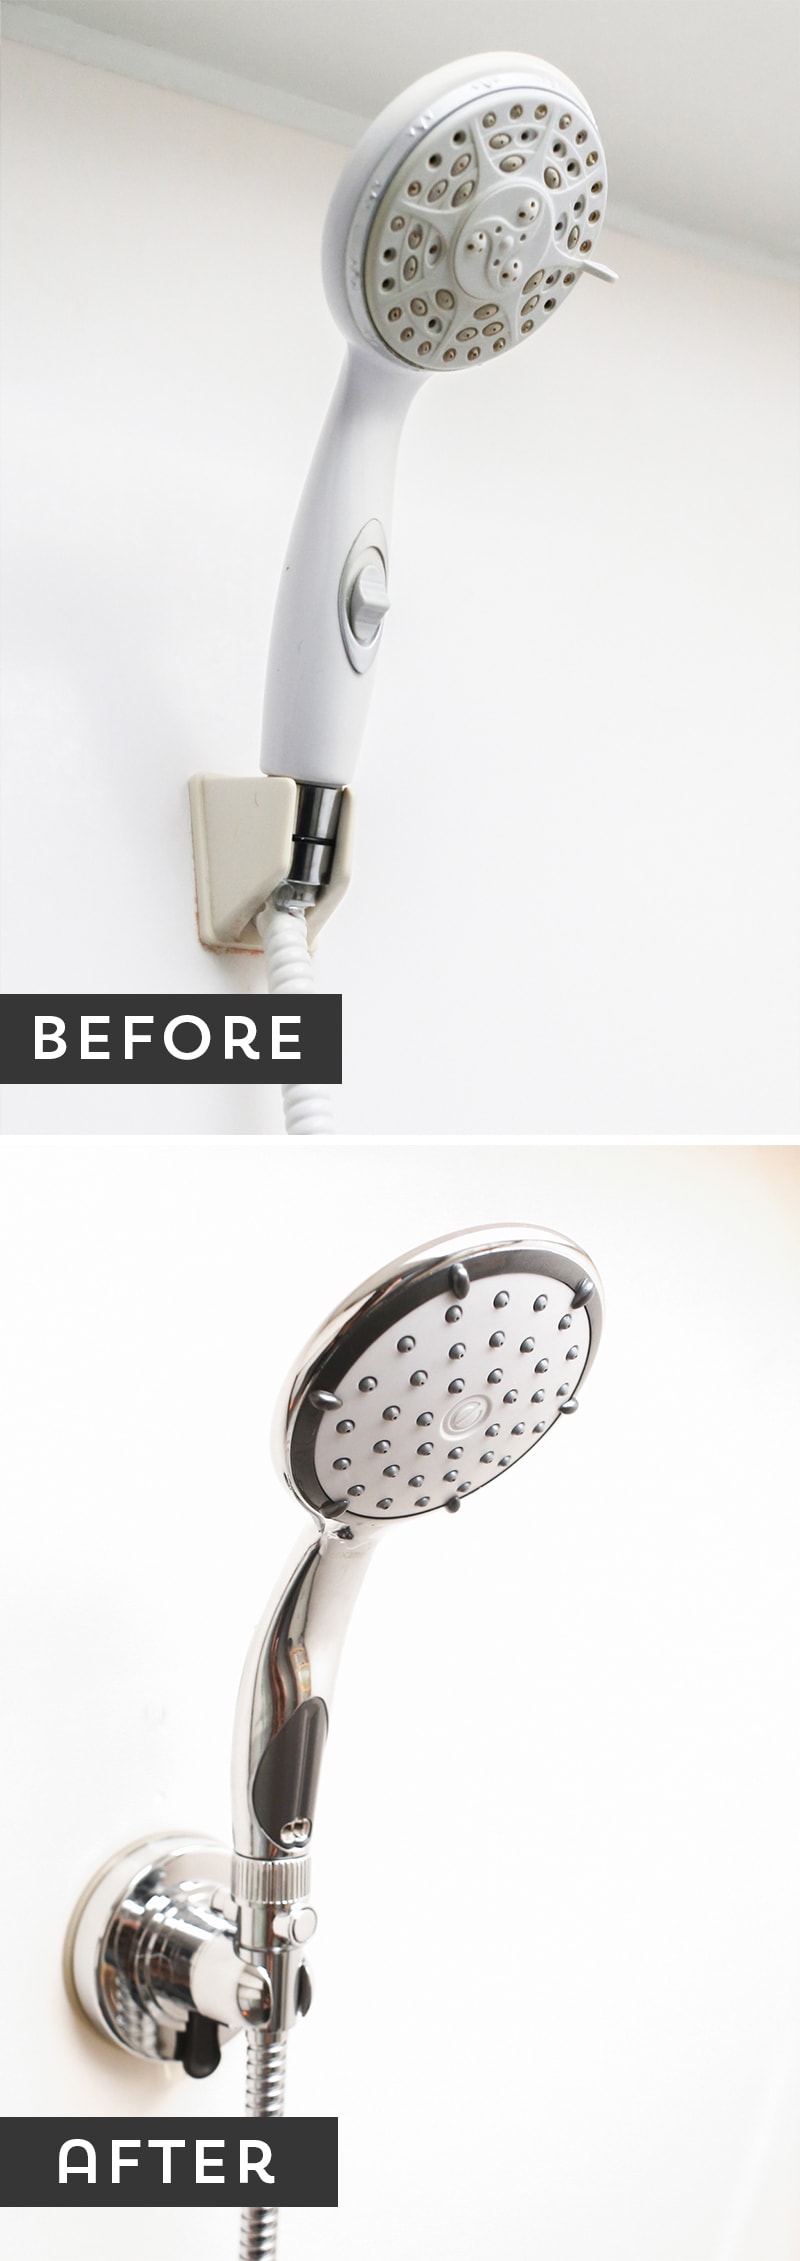 Could your RV shower use an upgrade? Come see how easy it is to replace your RV shower head and hose, plus find out if the EcoCamel Jetstorm is worth it! MountainModernLife.com